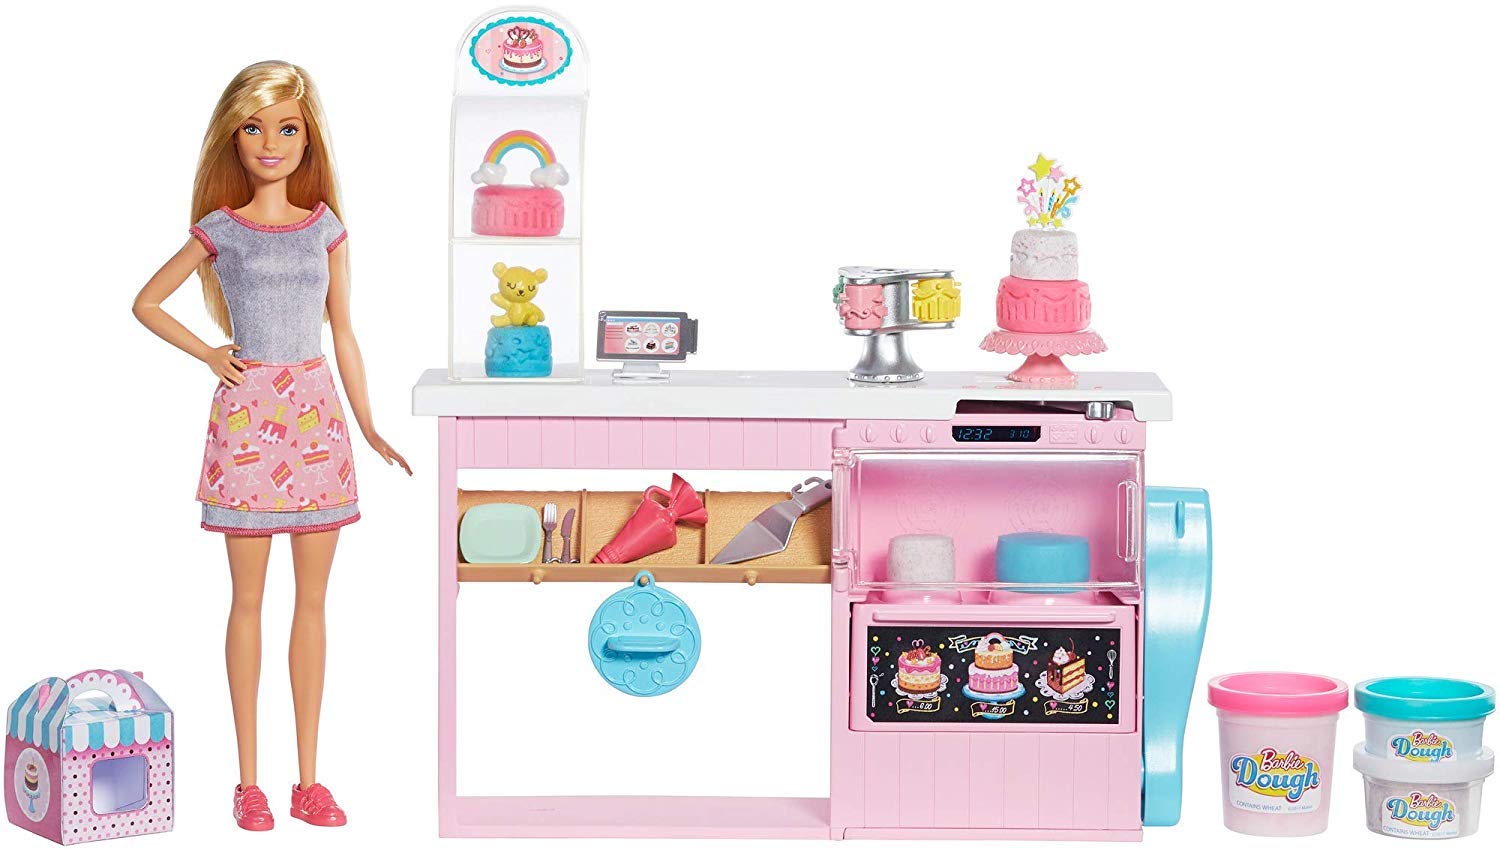 Barbie Gfp59 Cake Bakery And Doll Playset Toy For Ages 4 Years And Above, M